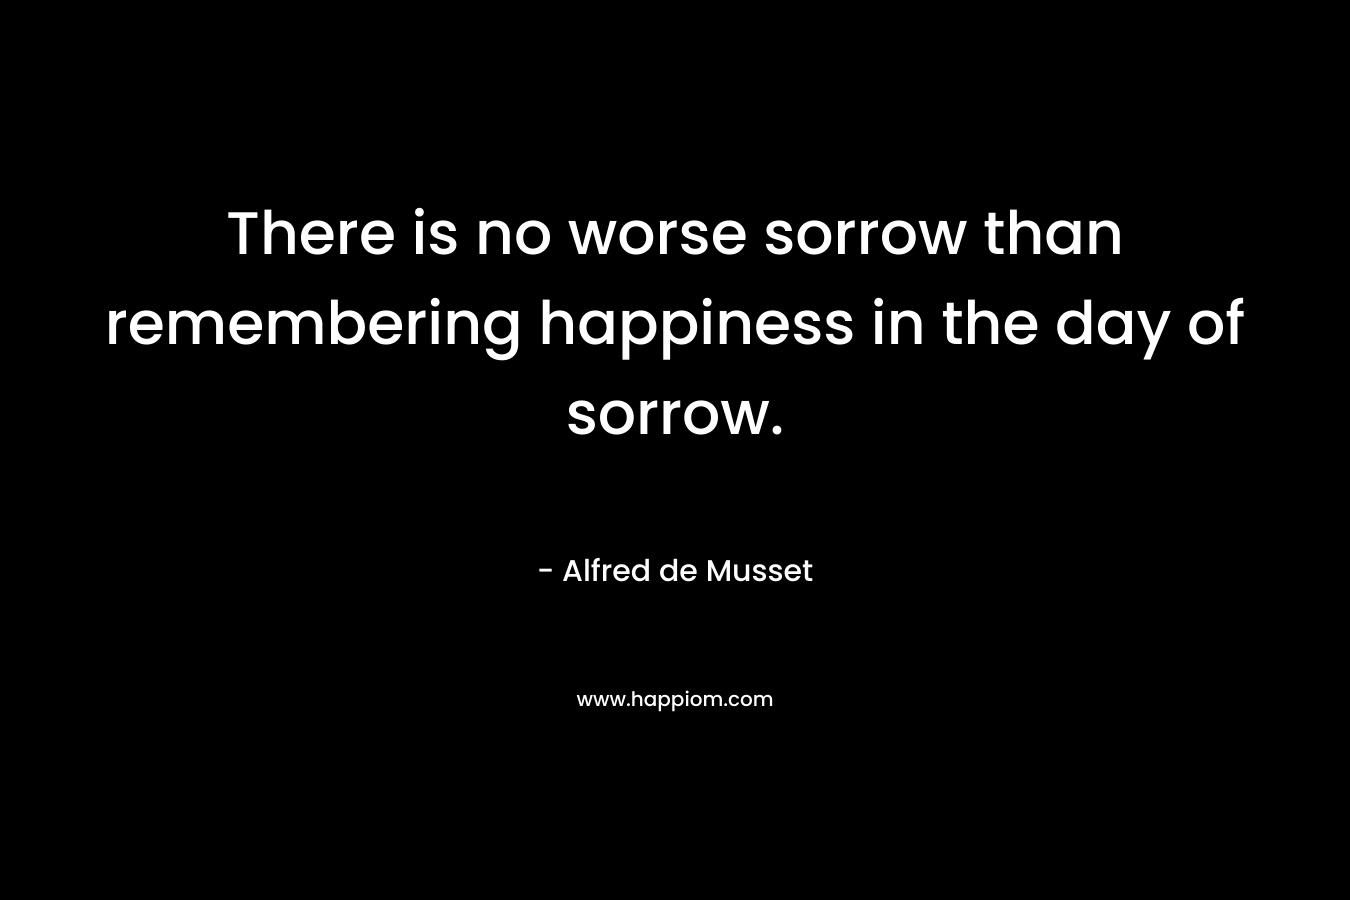 There is no worse sorrow than remembering happiness in the day of sorrow. – Alfred de Musset